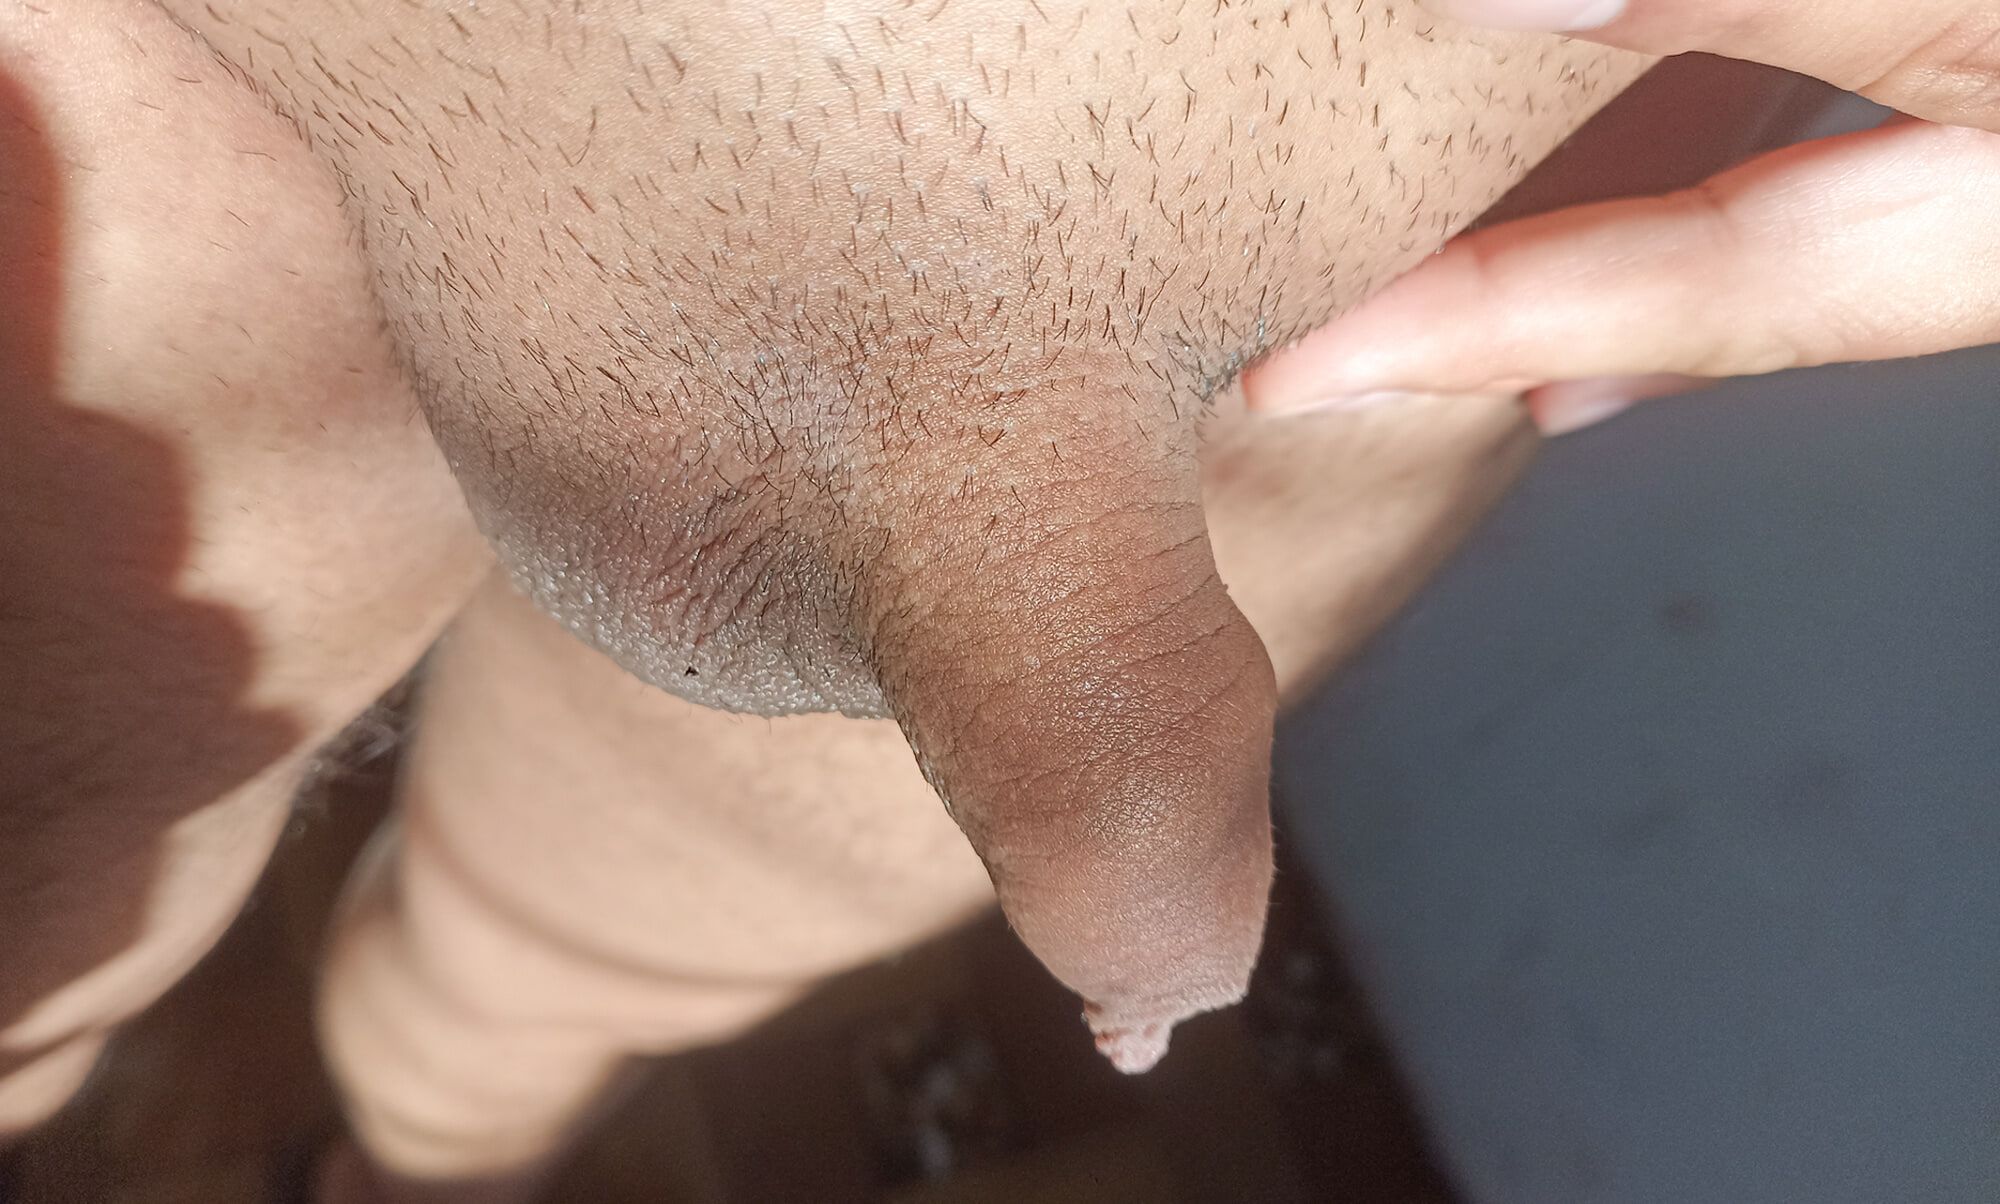 My little Flaccid Penis (without Erection) - Compilation 2 #12